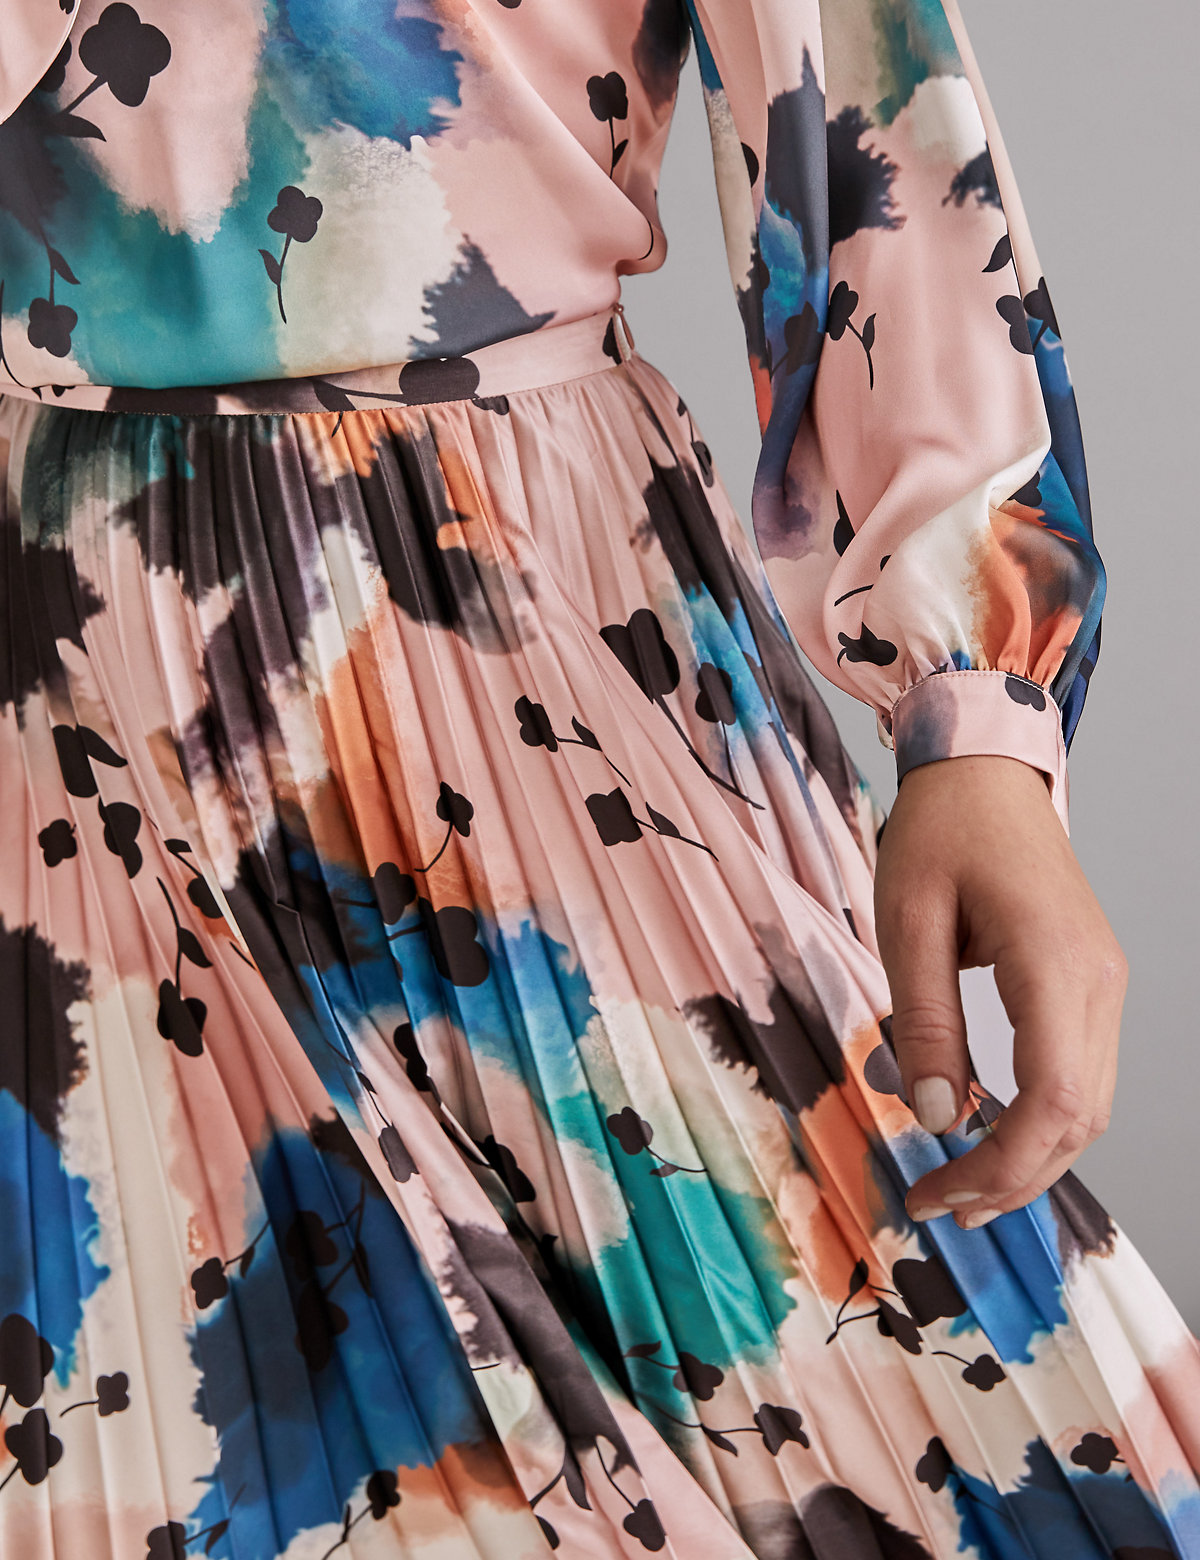 Abstract Floral Pleated Midi Skirt